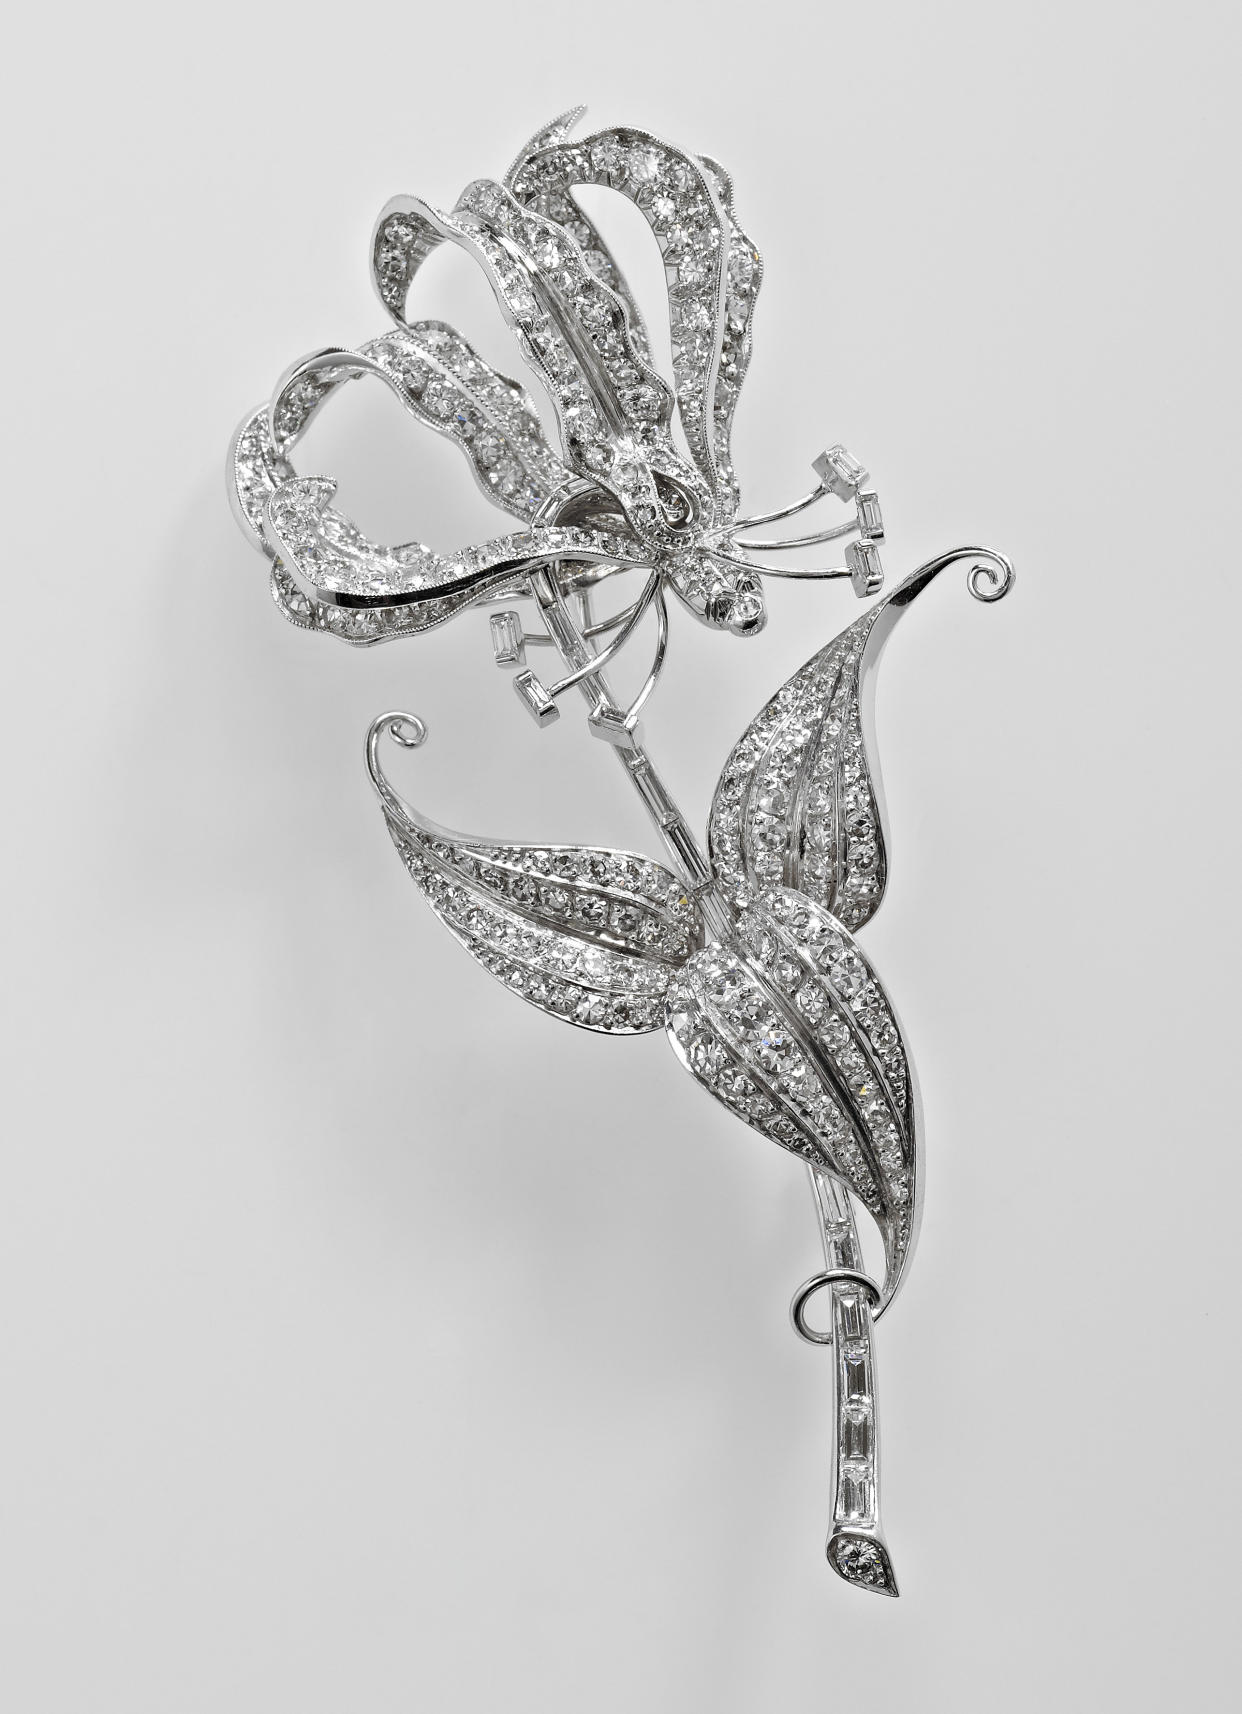 The Queen's Flame-Lily brooch